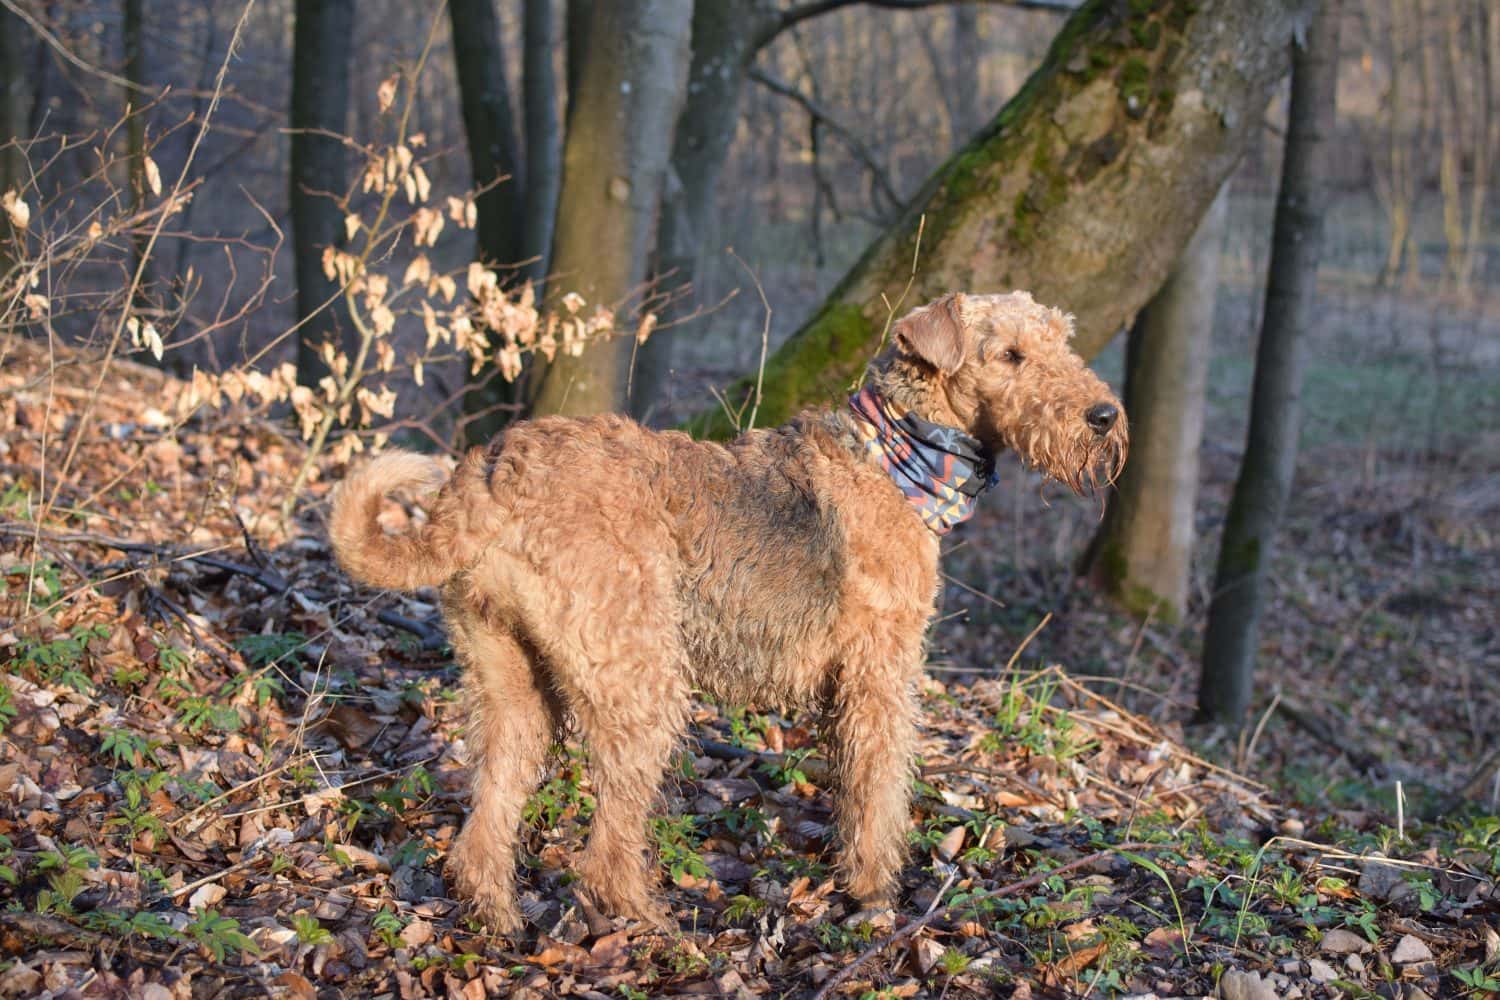 Airedale Terrier in sunlight at forest